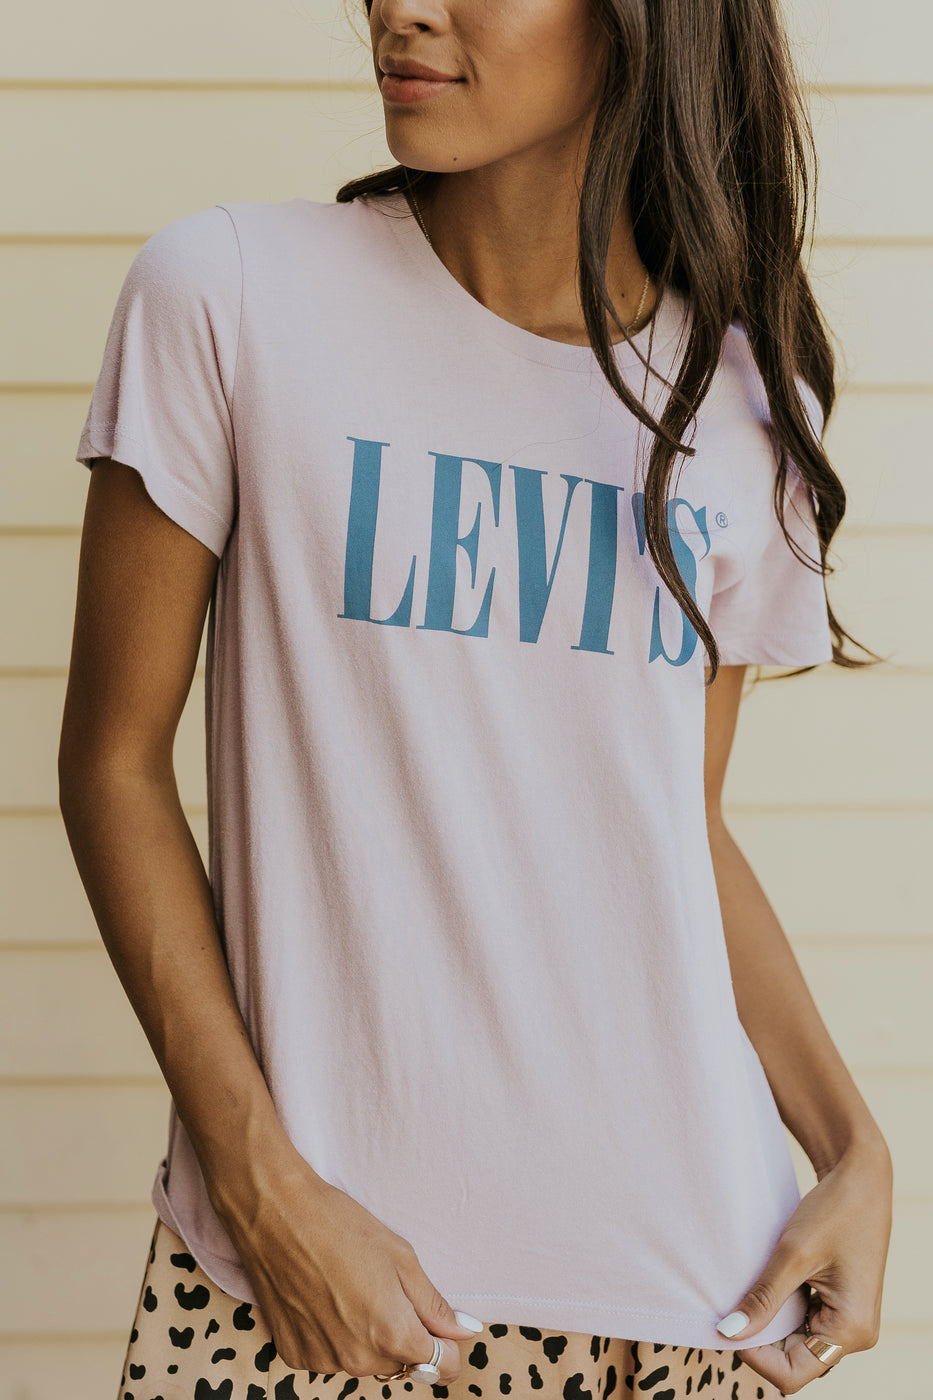 levis graphic tees